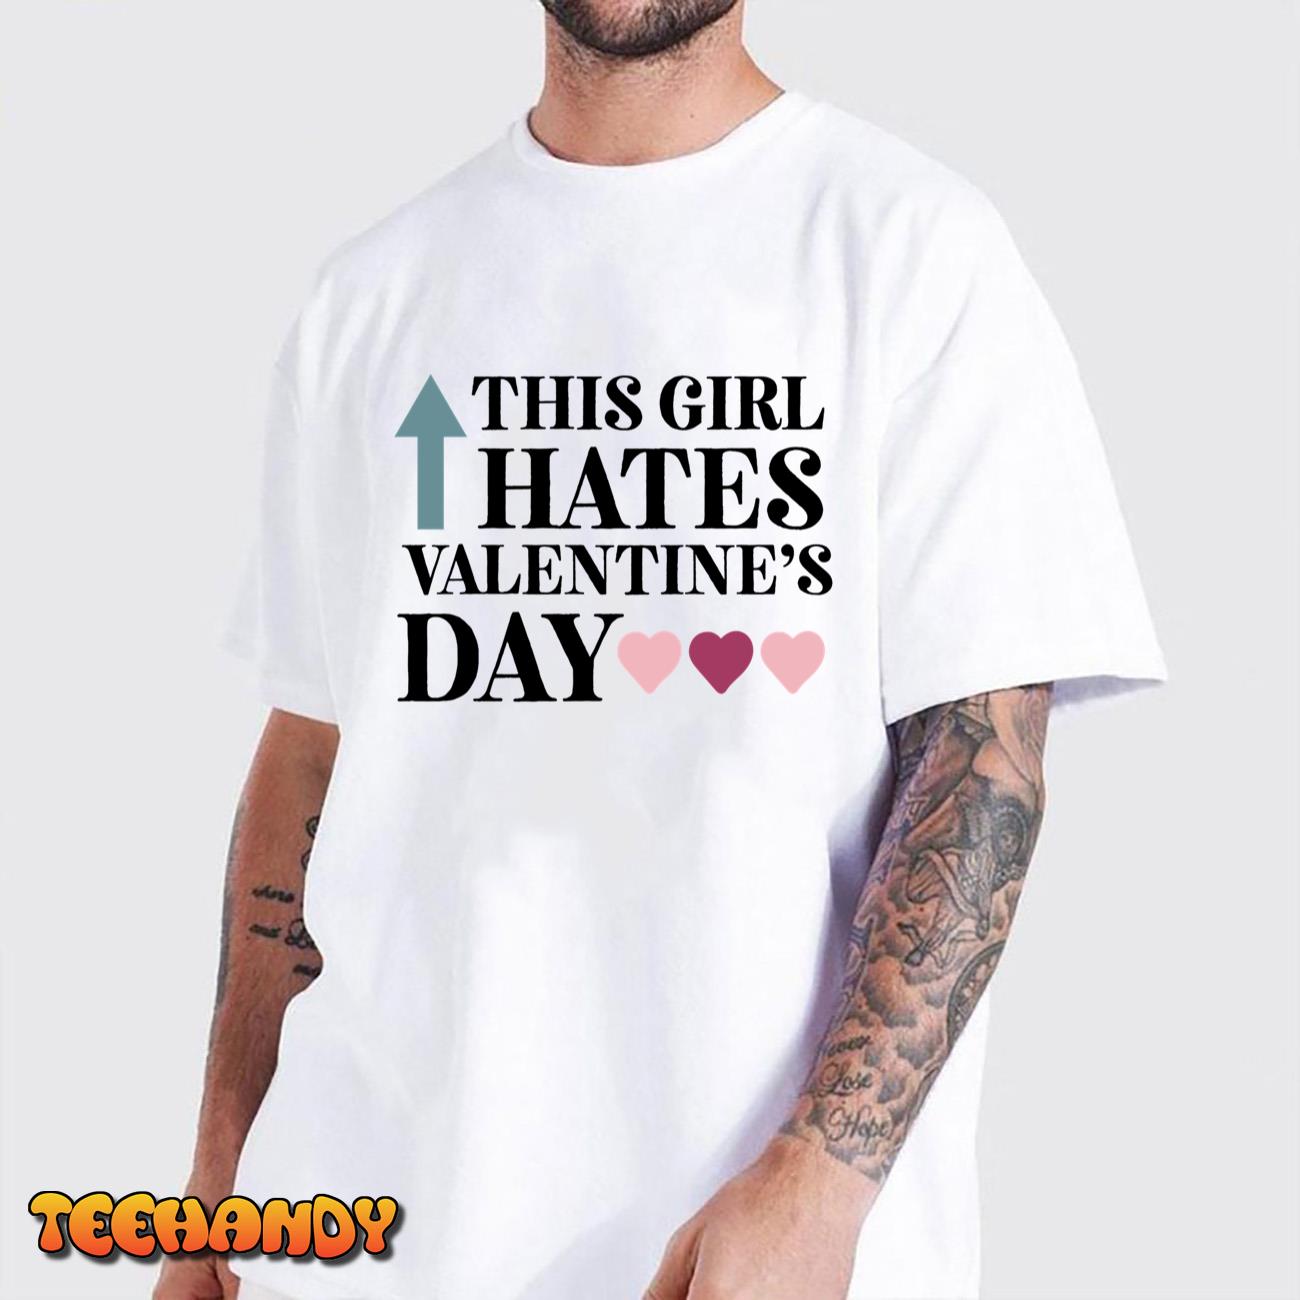 This Girl Hates Valentines, Anti Valentines, Singles Awareness Day T Shirt